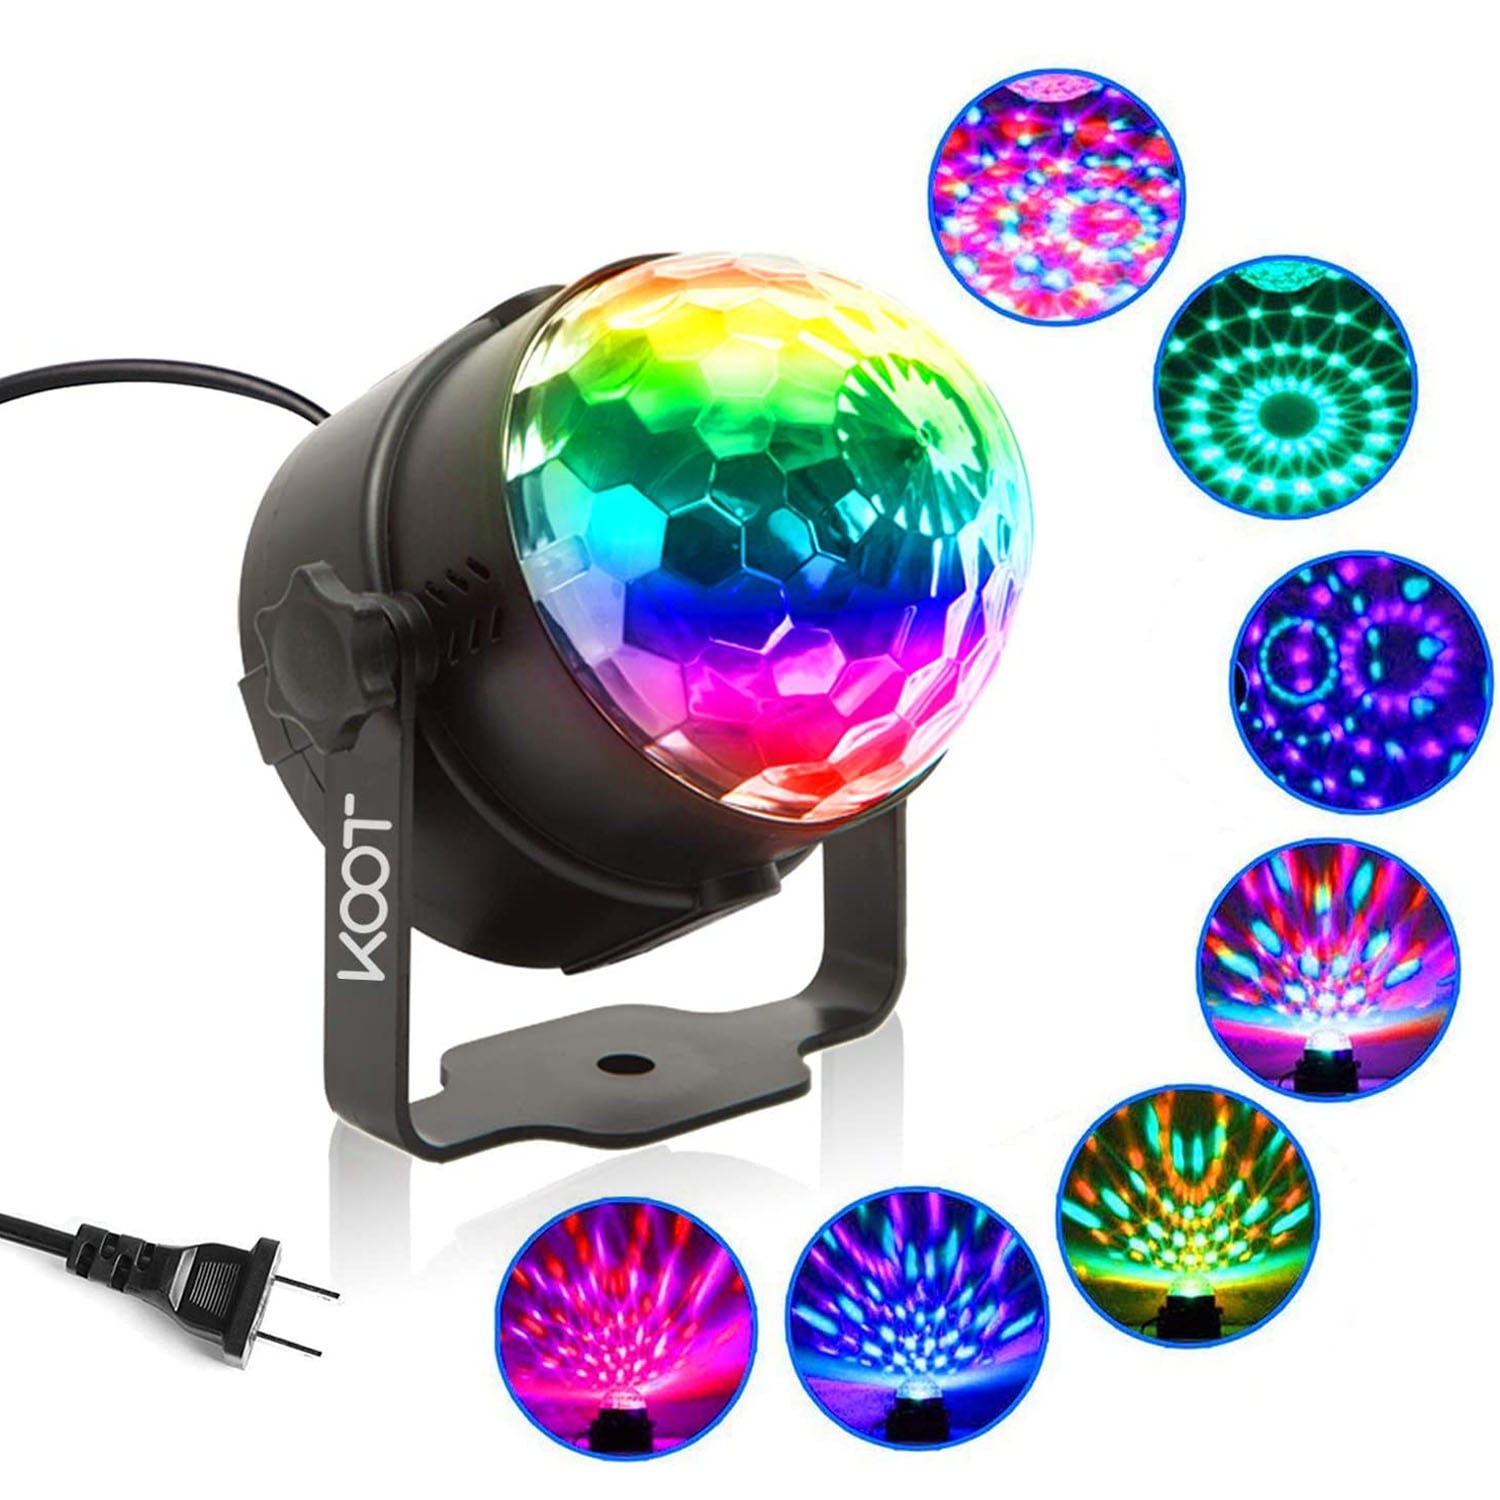 Car and Other USB Devices Gvoo Mini USB Party Lights Sound Activated 3W RGB Disco Ball with 4 Adapters for Mobile Phones Disco Lights 